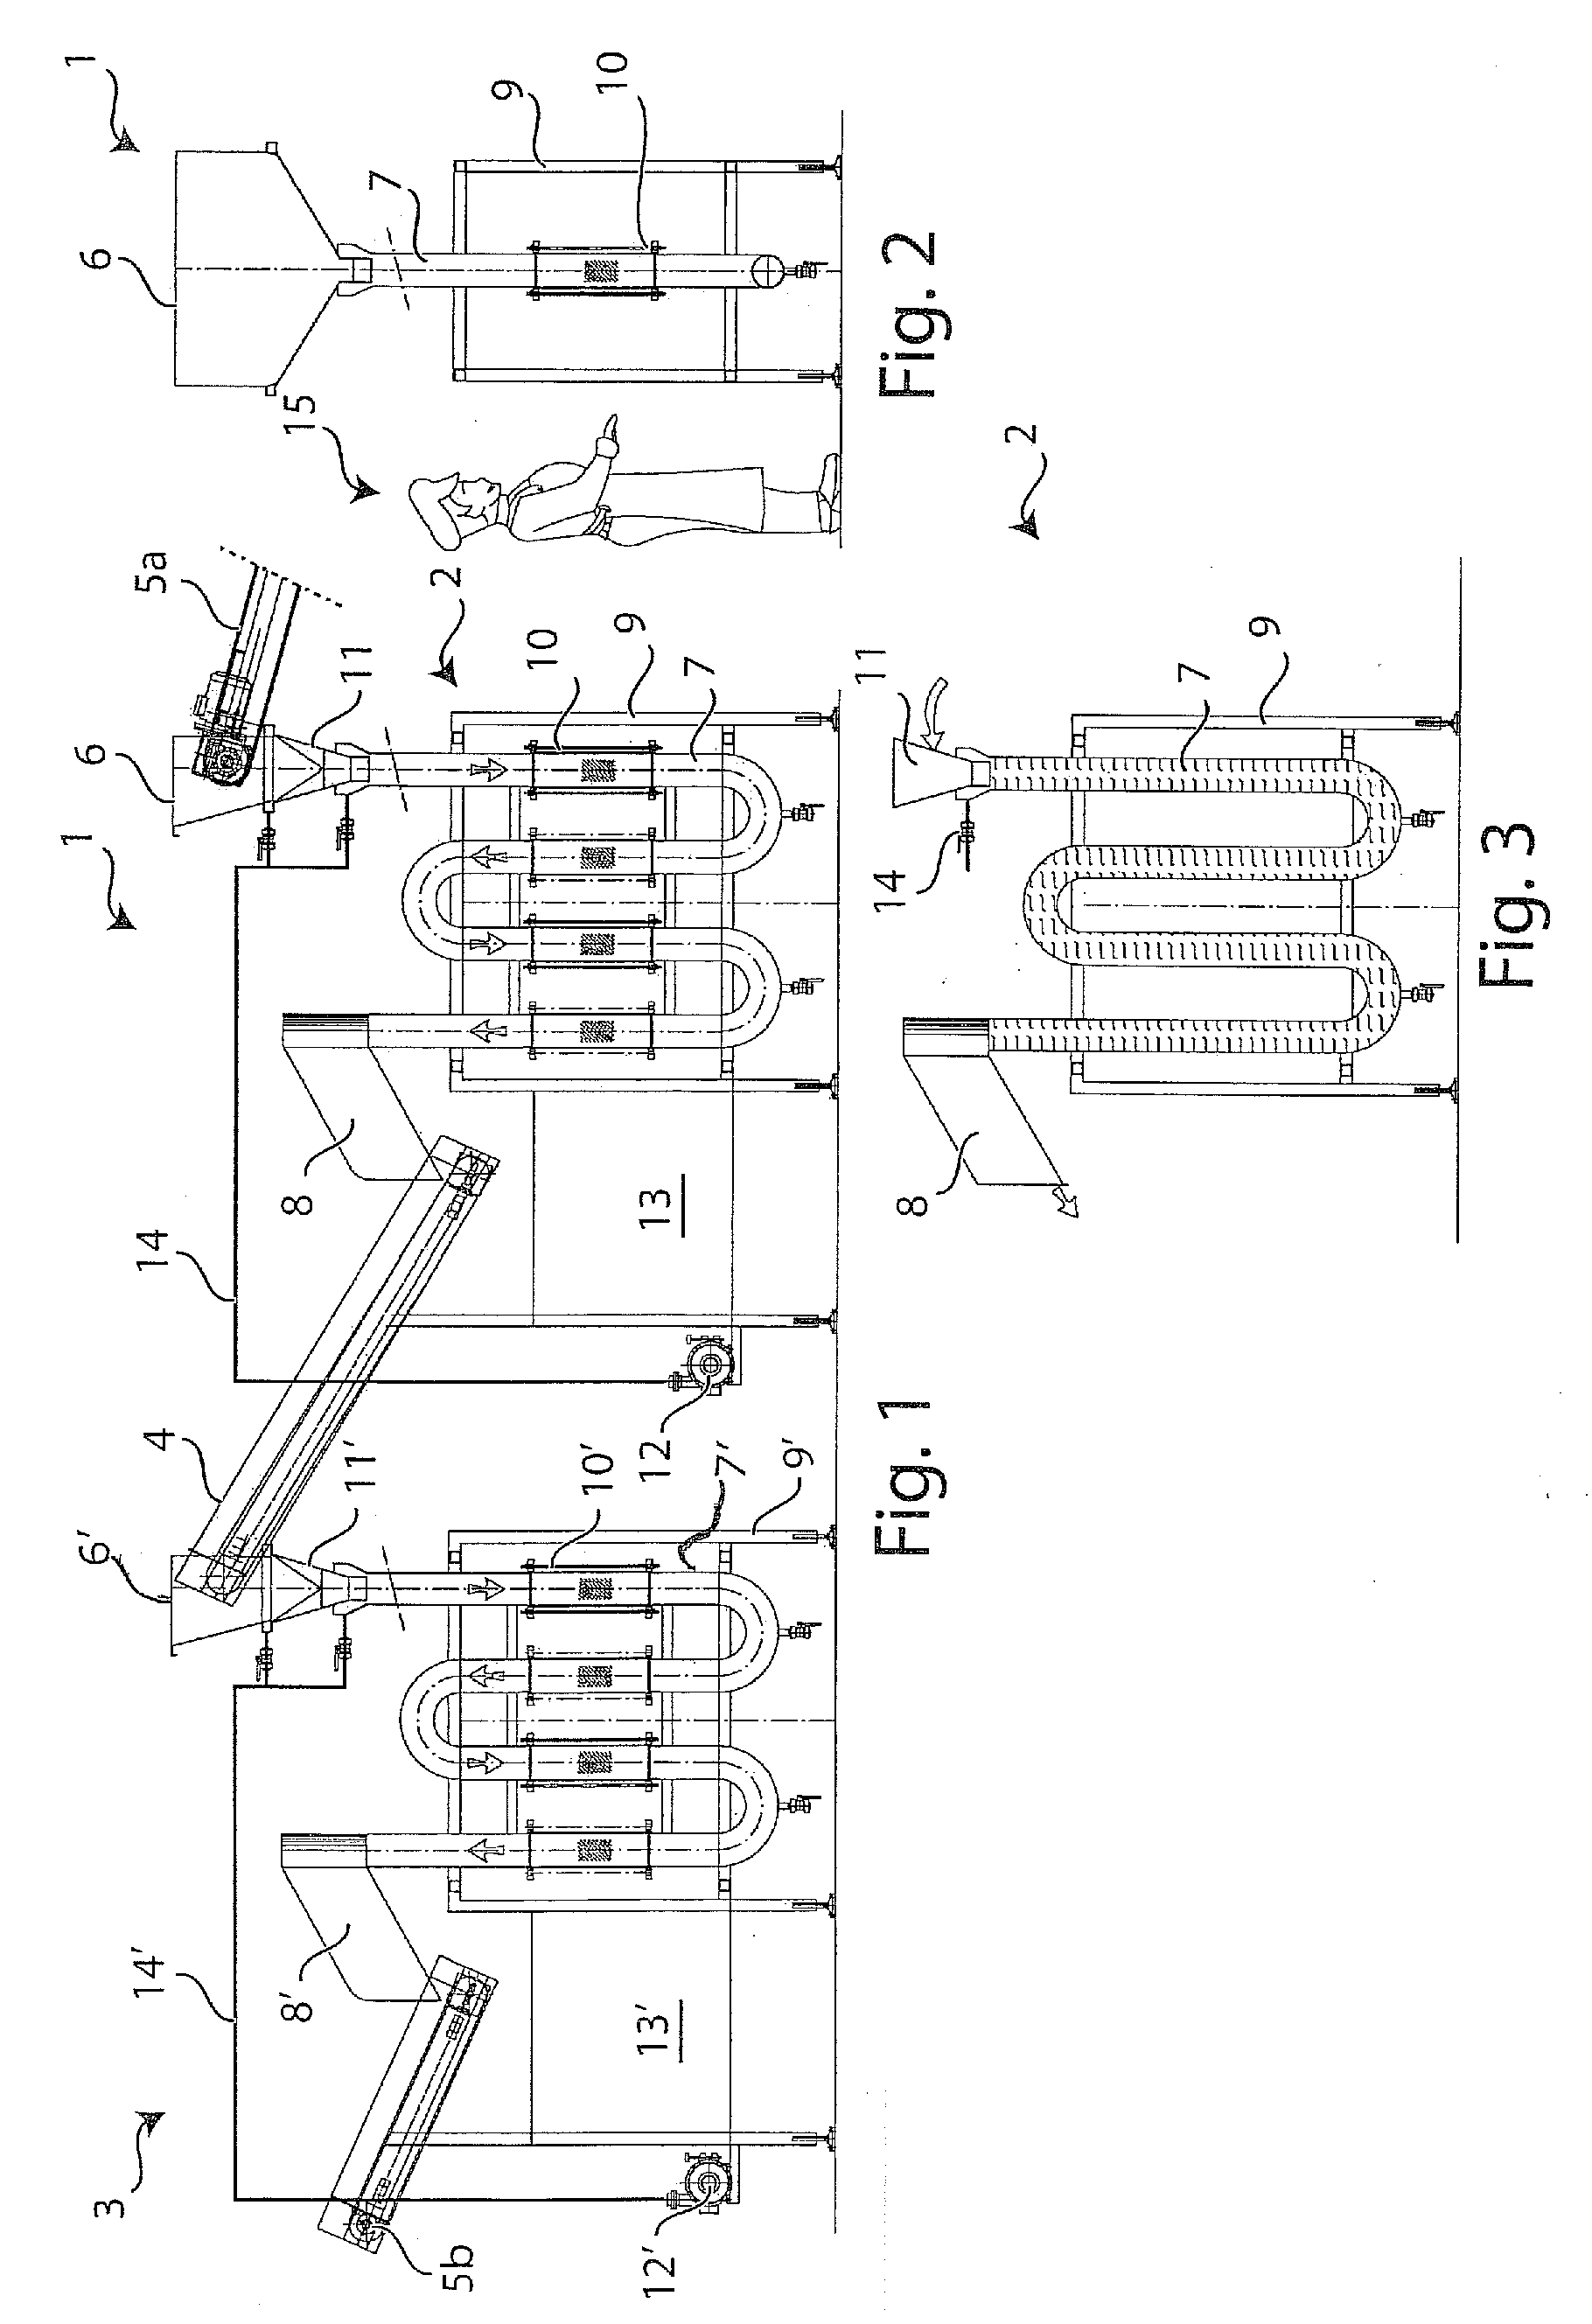 System for pasteurisation thermal treatment of foodstuffs, particularly leaf product